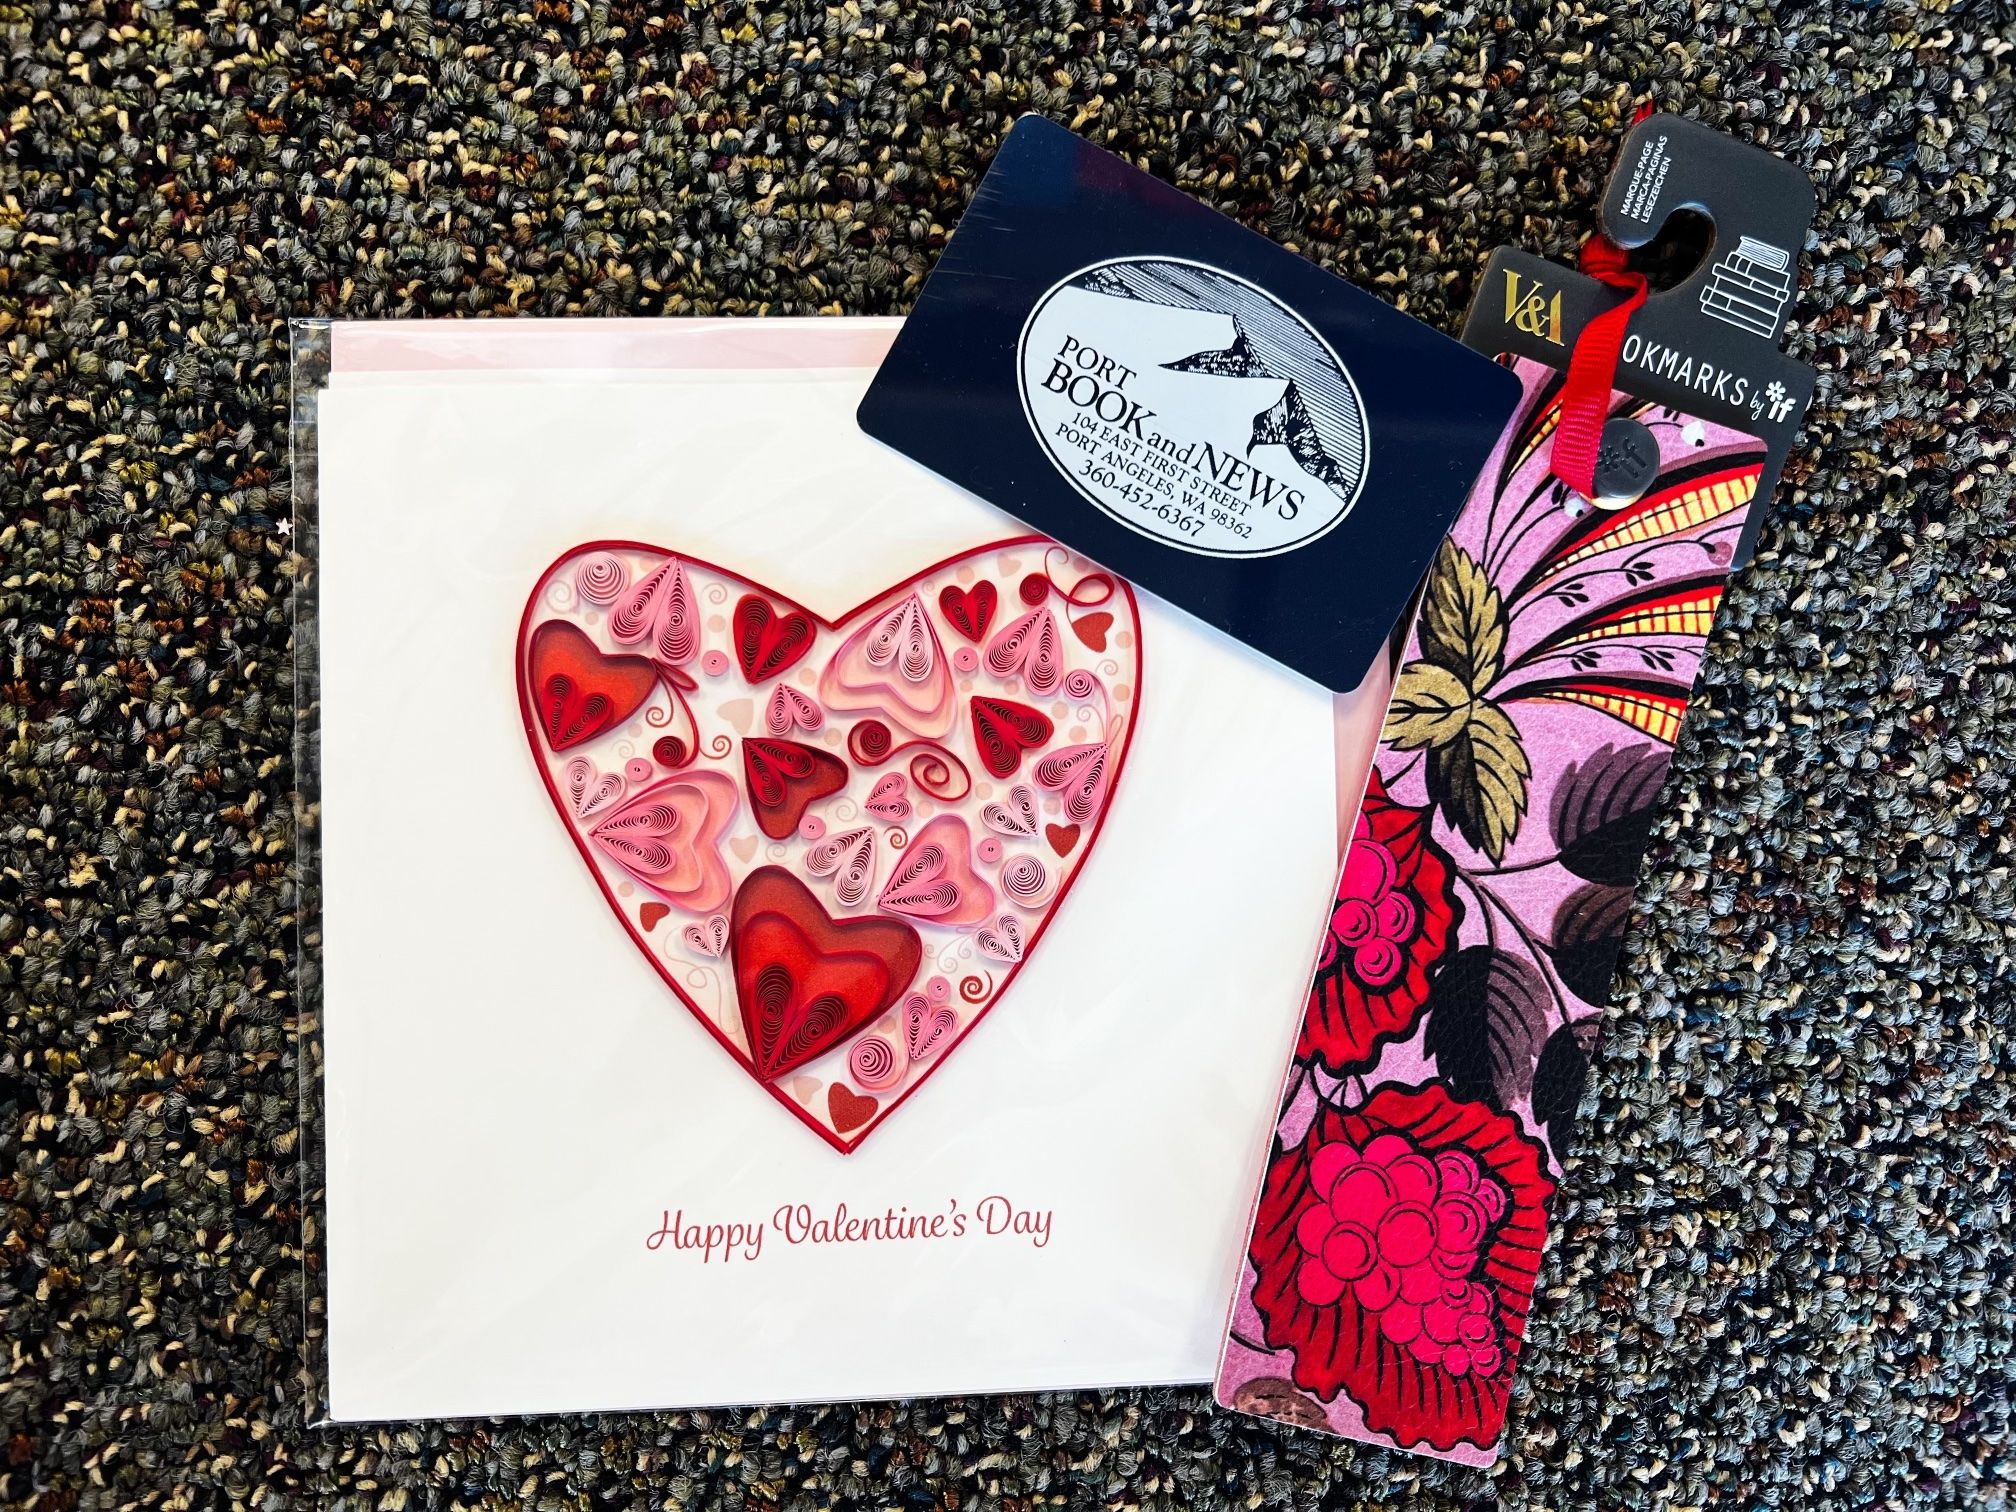 Valentines card, bookmark and gift certificate from Port Book and News